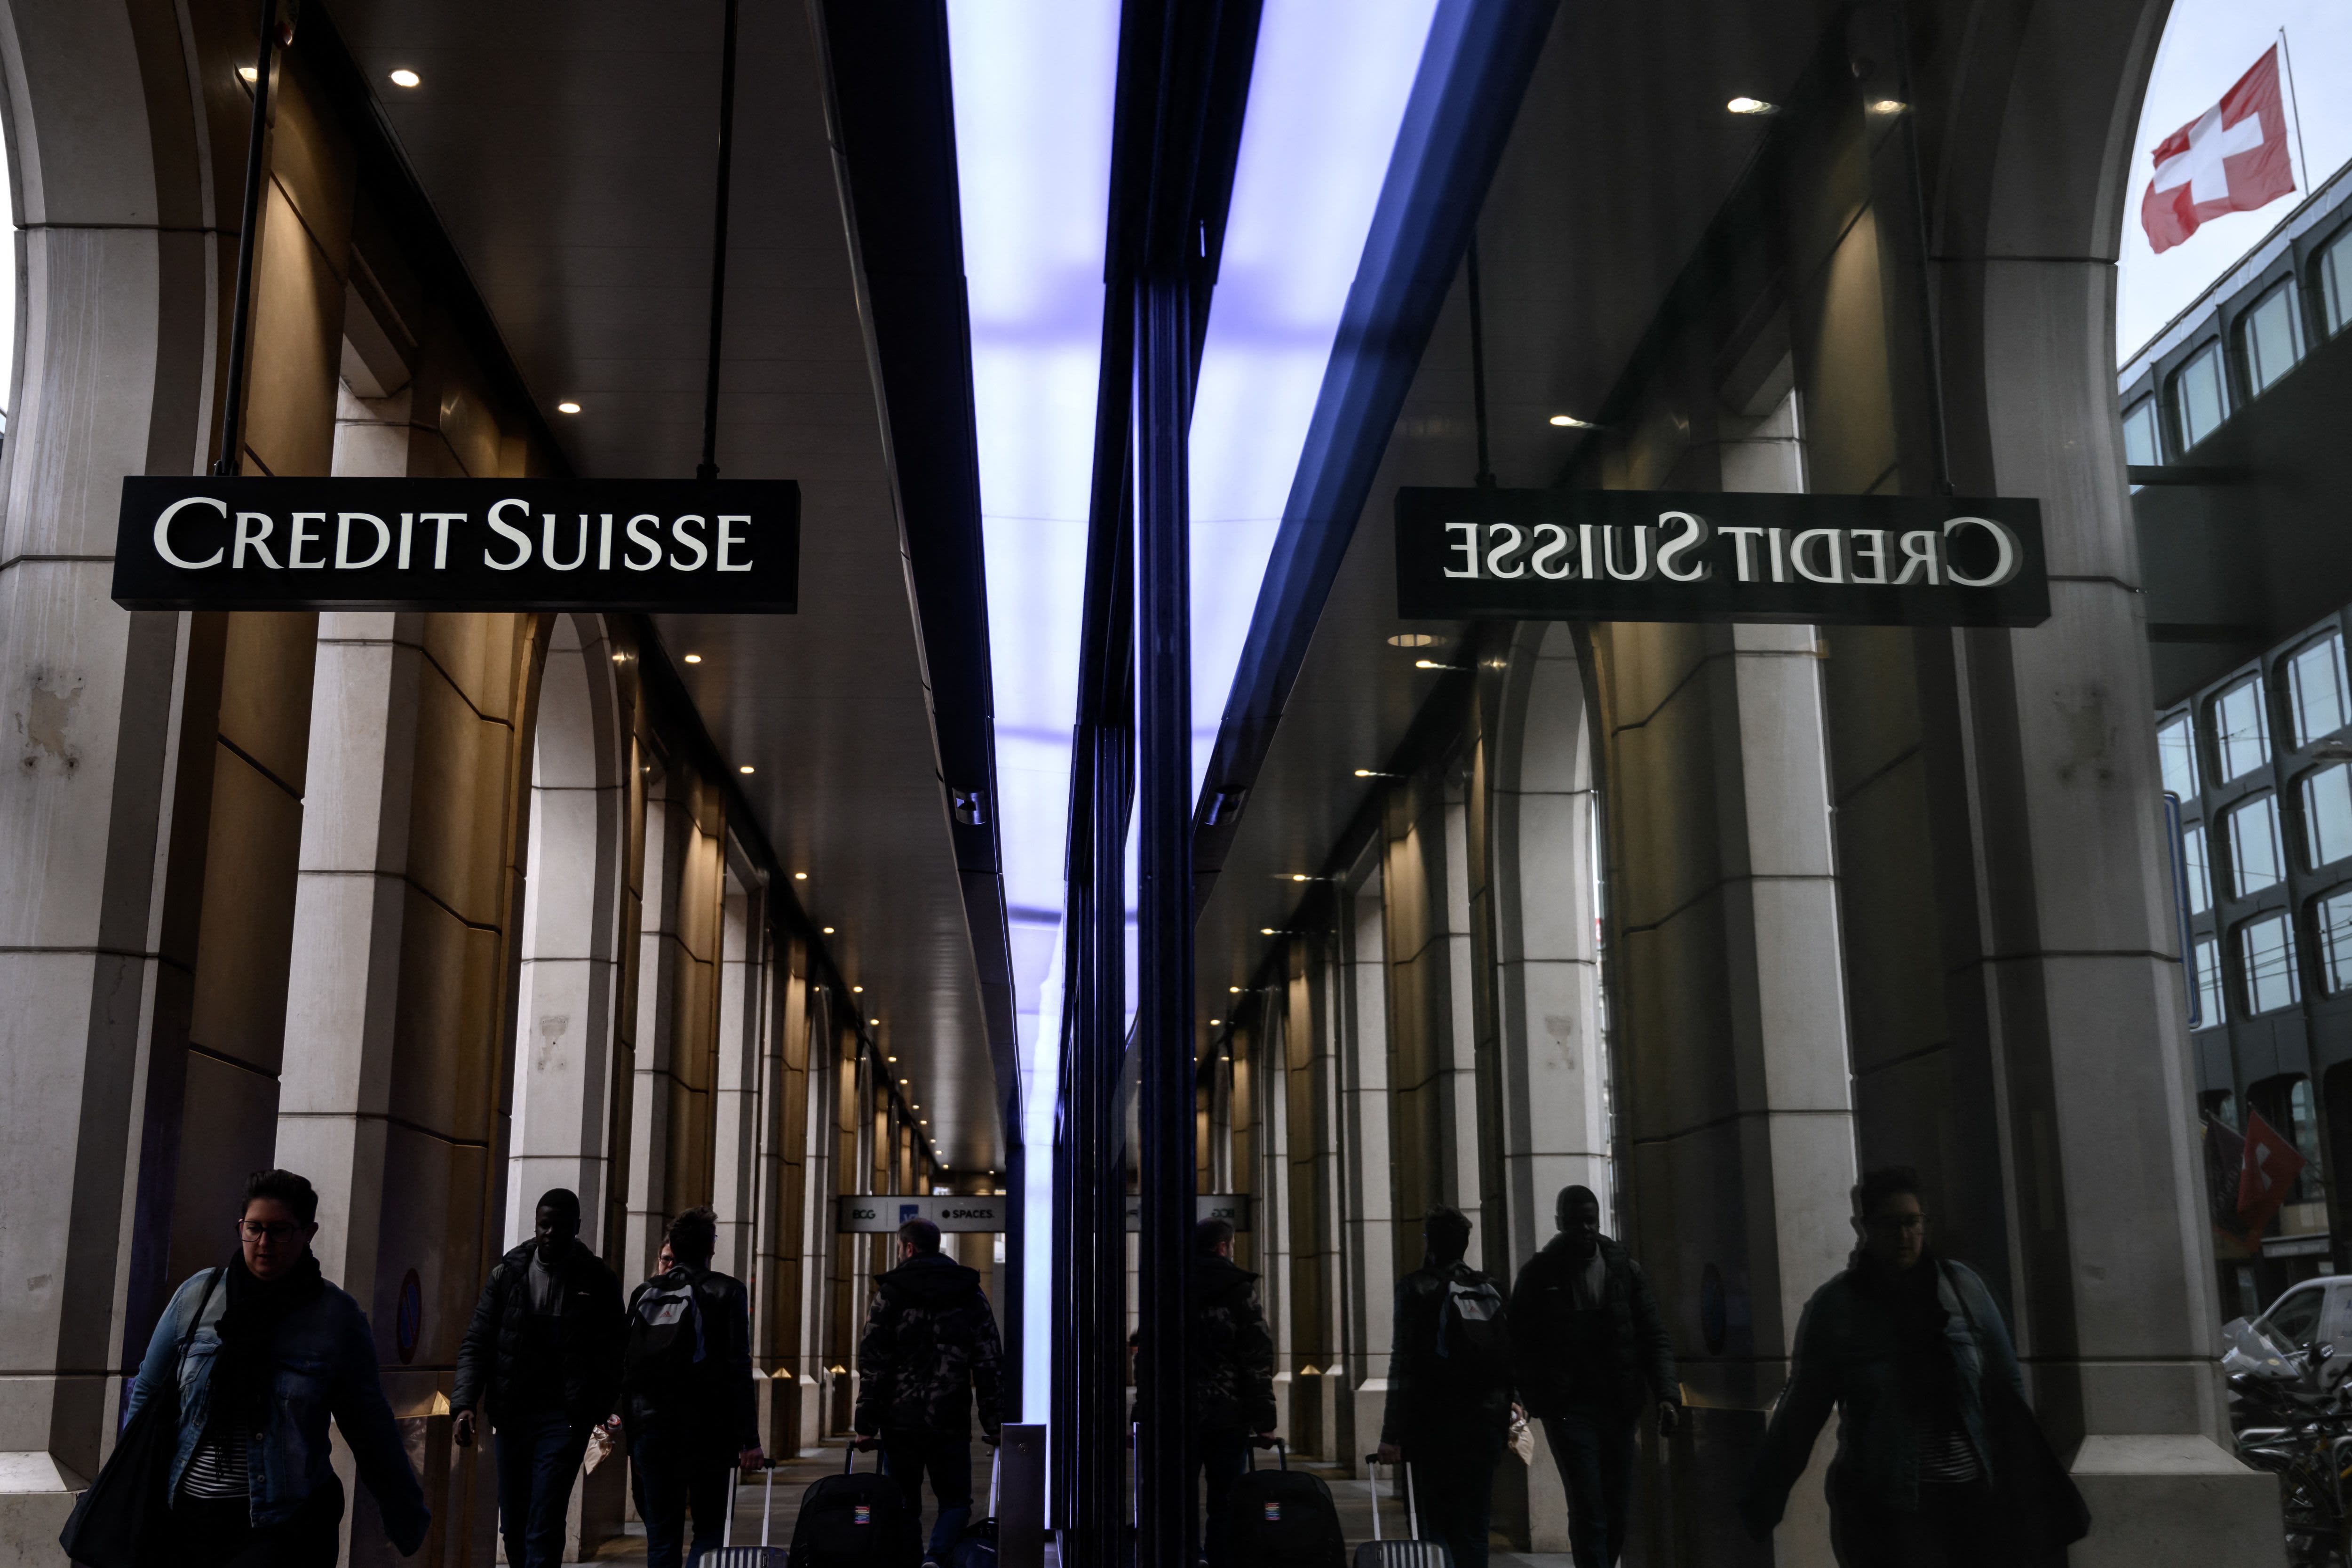 Credit Suisse is under pressure, but short sellers seem to be eyeing another global bank